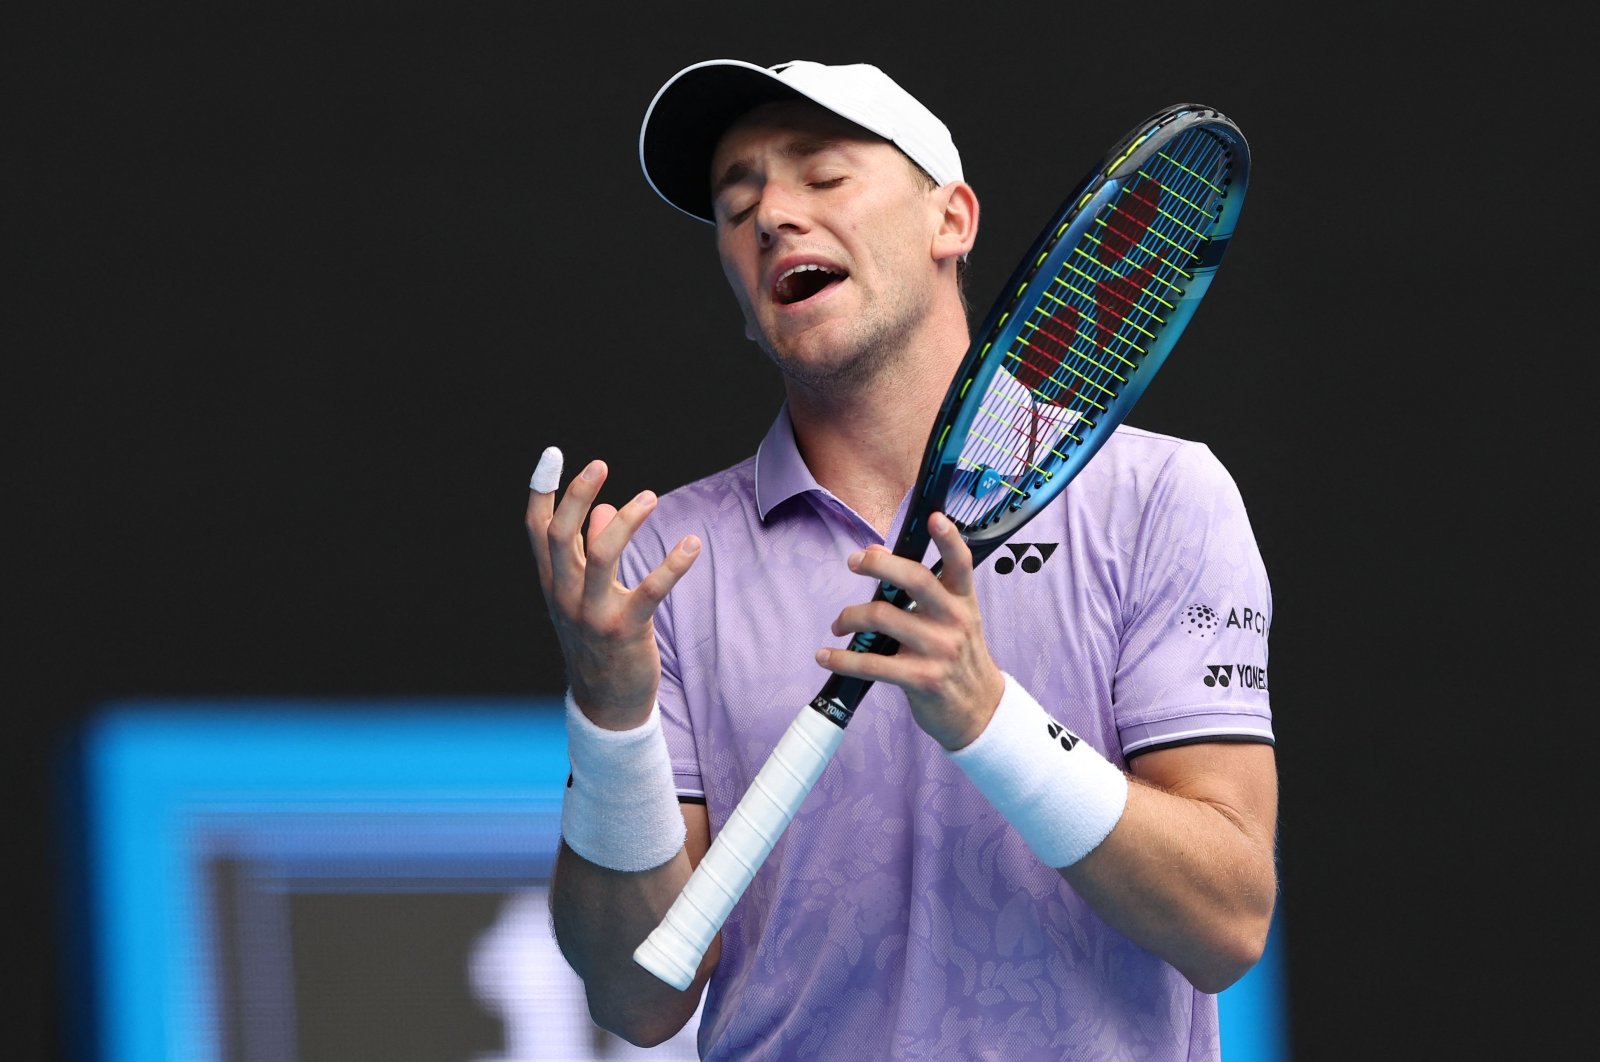 Norway&#039;s Casper Ruud reacts as he plays against USA&#039;s Jenson Brooksby during their men&#039;s singles match on day four of the Australian Open tennis tournament, Melbourne, Australia, Jan. 19, 2023. (AFP Photo)